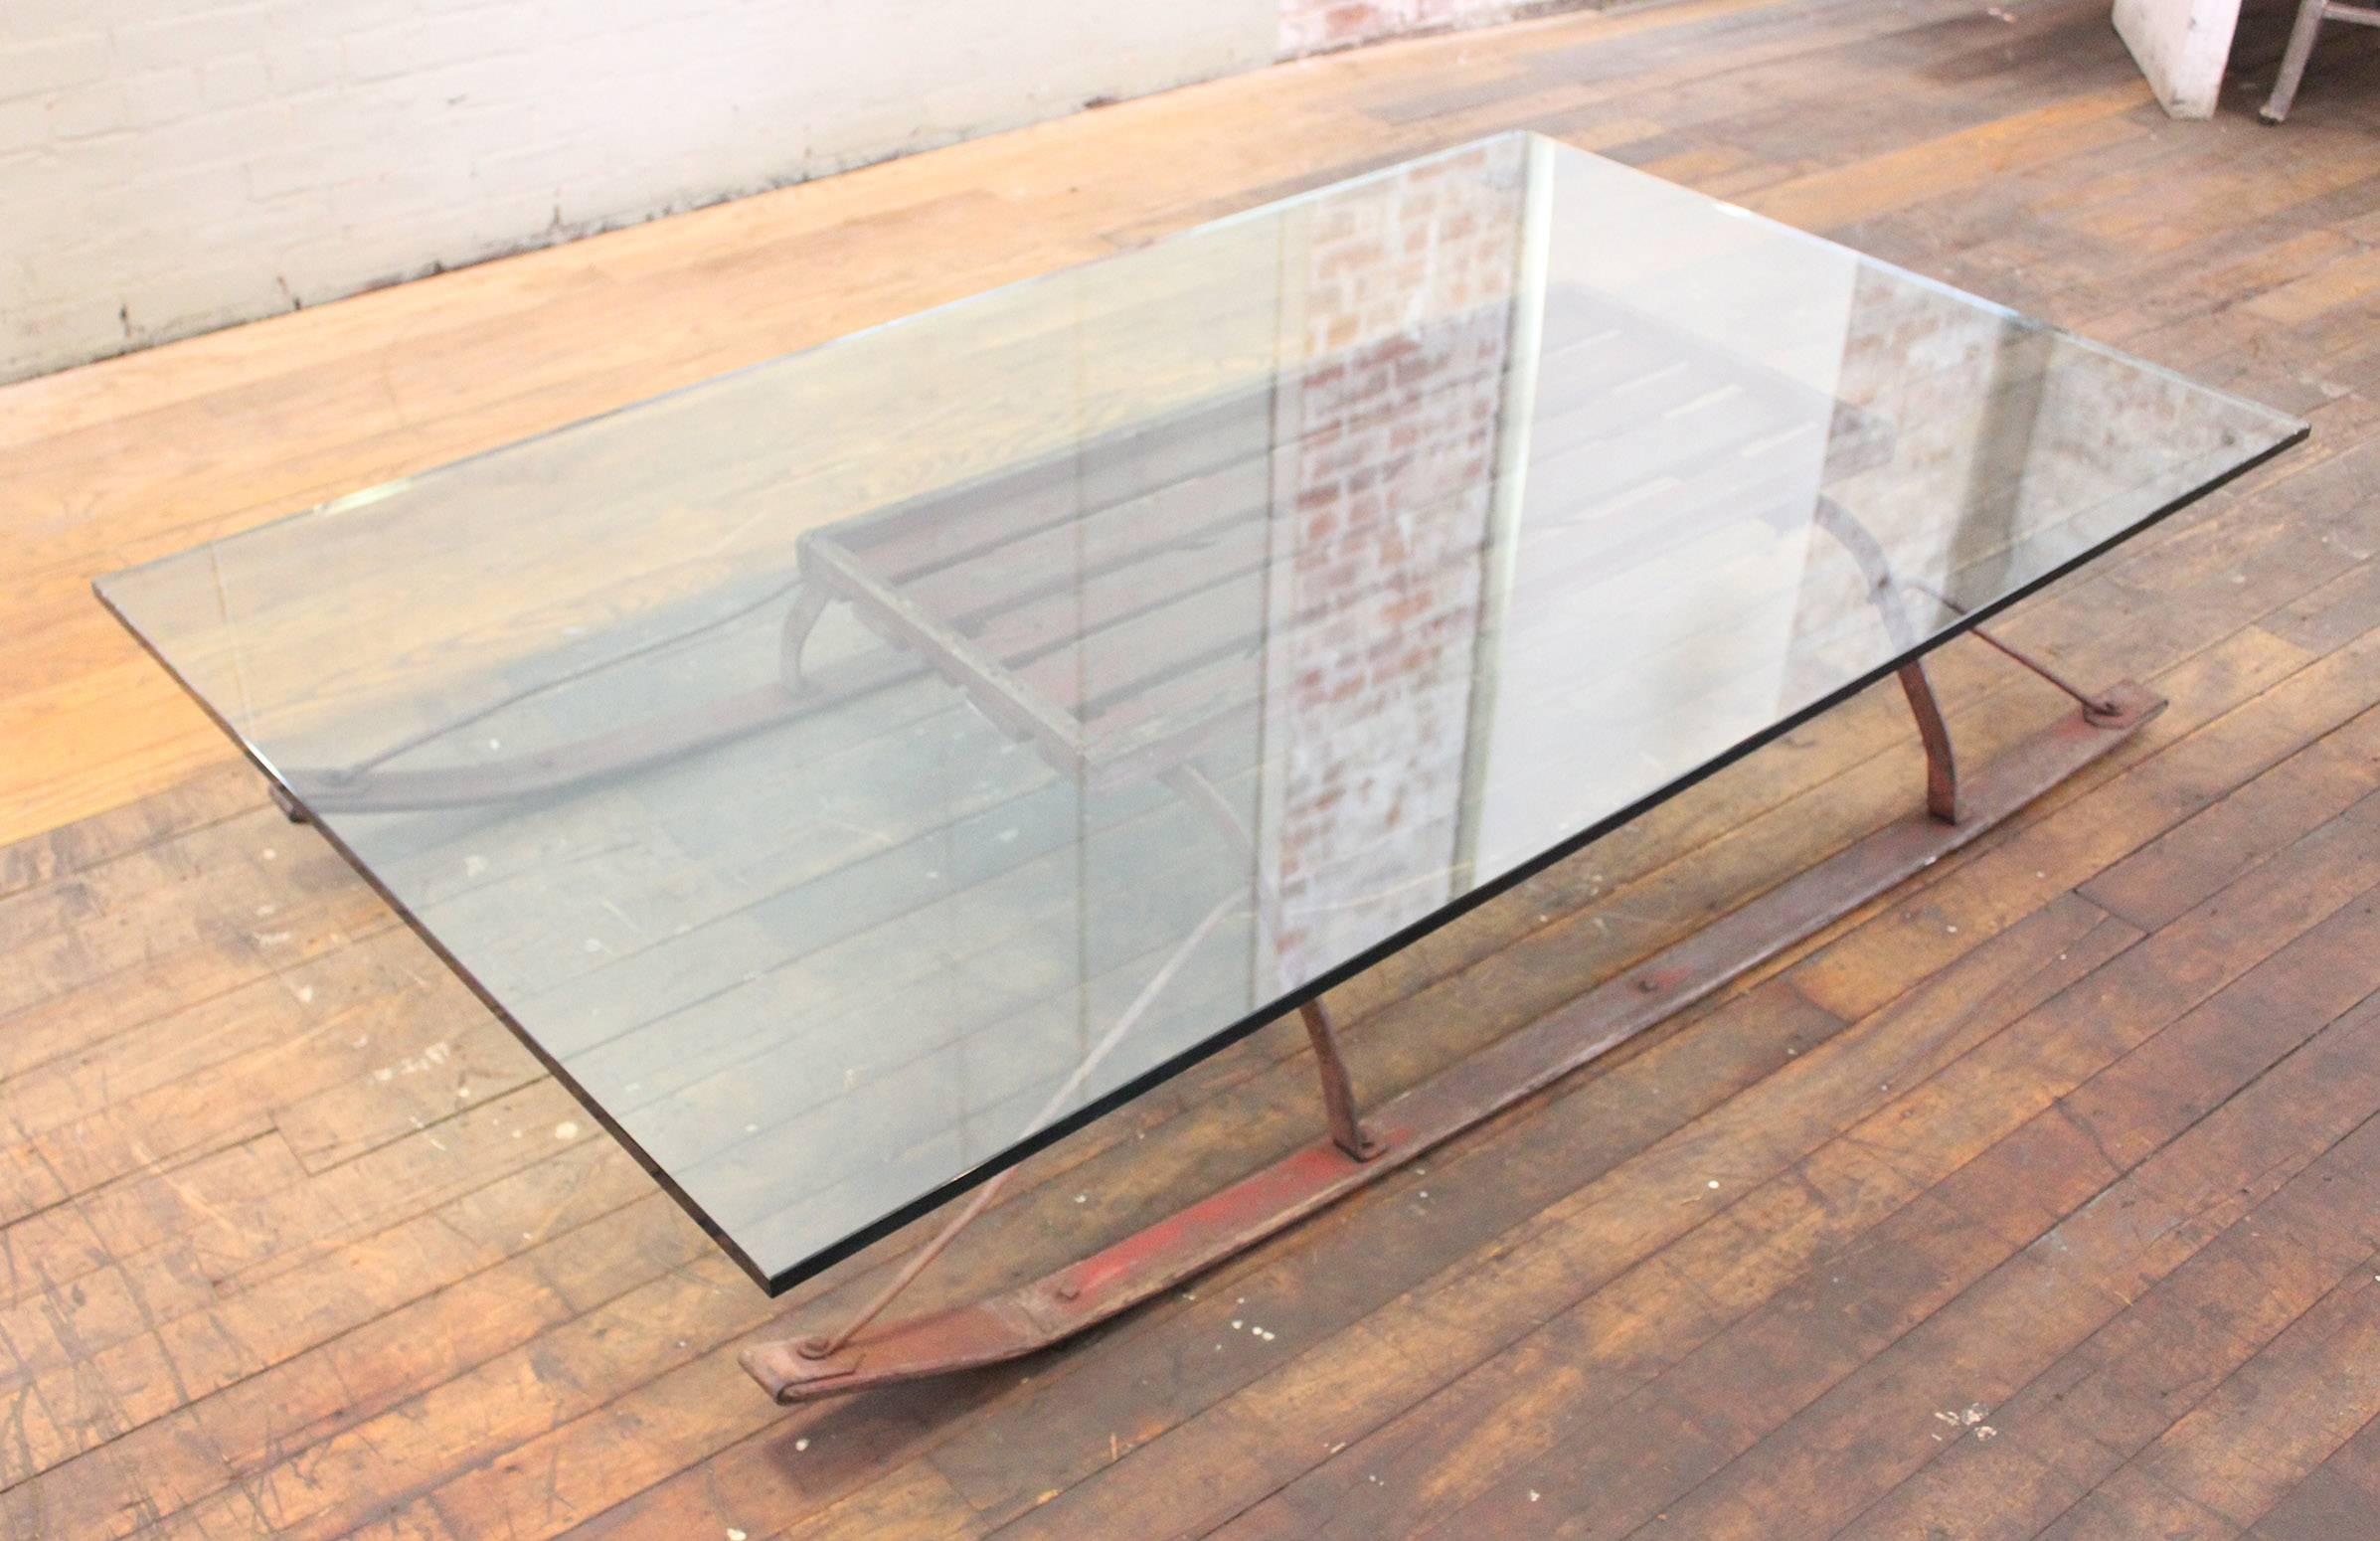 Vintage wood-and-steel sled repurposed as a coffee table with a glass top. Sled measures 67 1/2